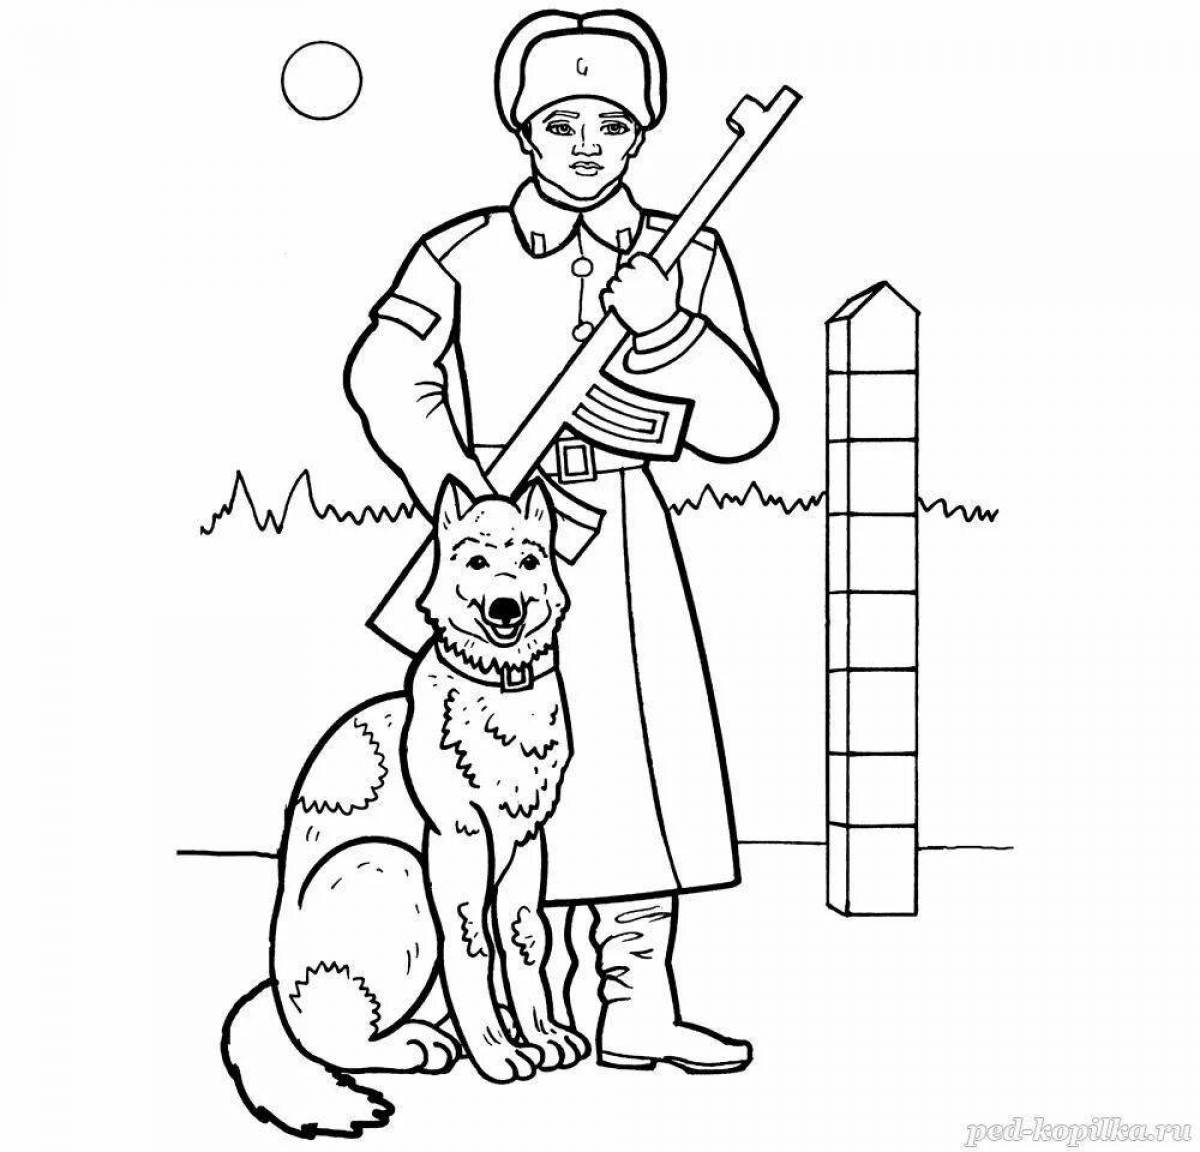 Intriguing soldier with dog coloring book